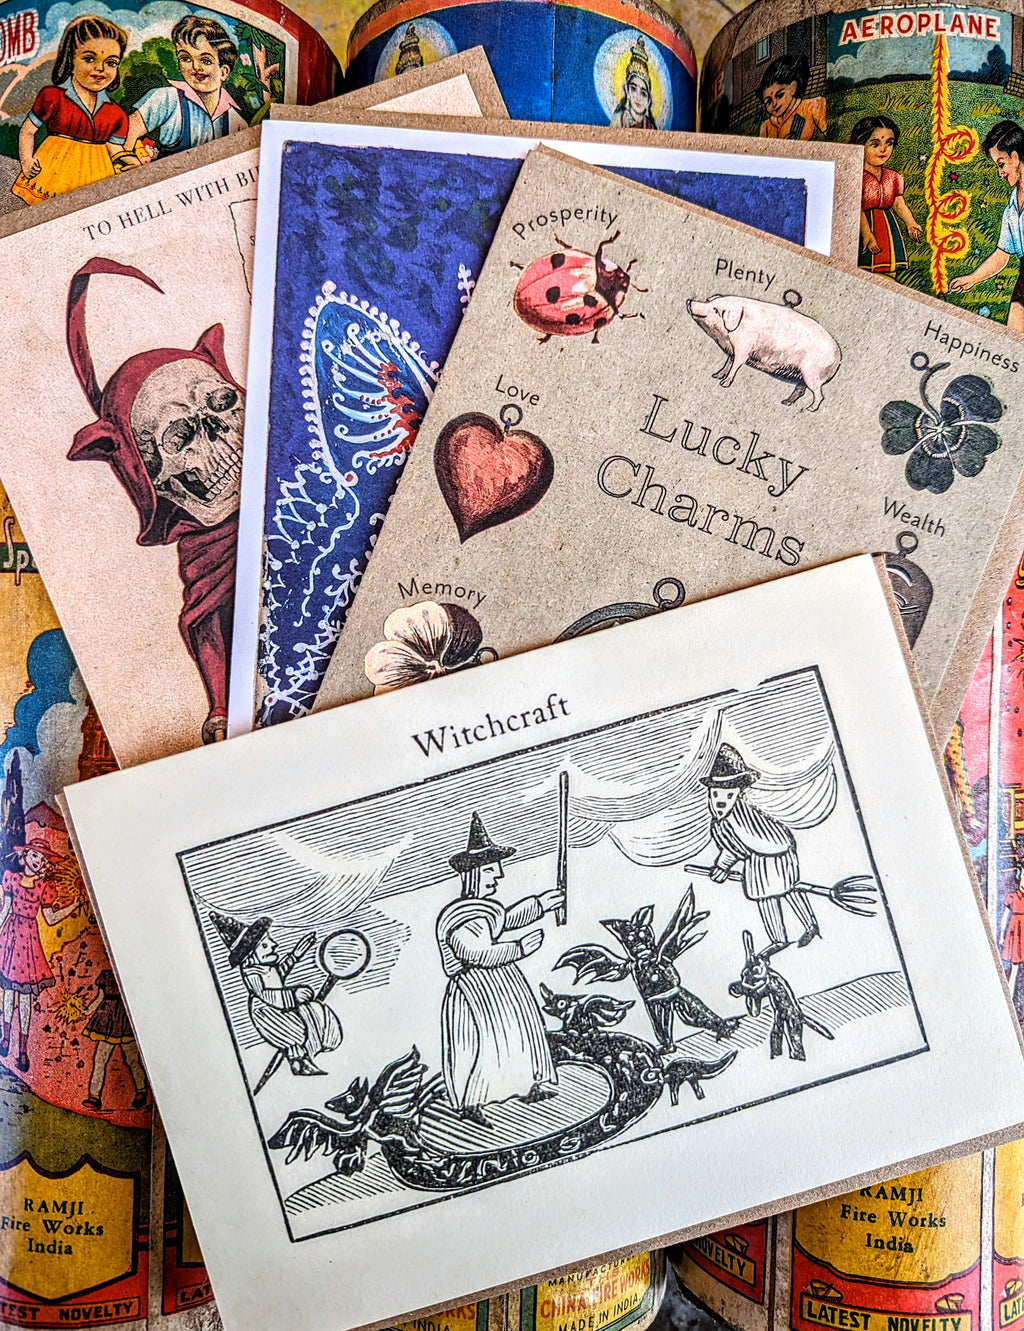 Set of 4 beautifully printed cards featuring vintage and antique illustrations of the weird and therefore wonderful witches, devils , crazy cats and superstitions in the Wellcome Collection 

Set of 4 cards.

Cards come with recycled brown envelopes.

 
